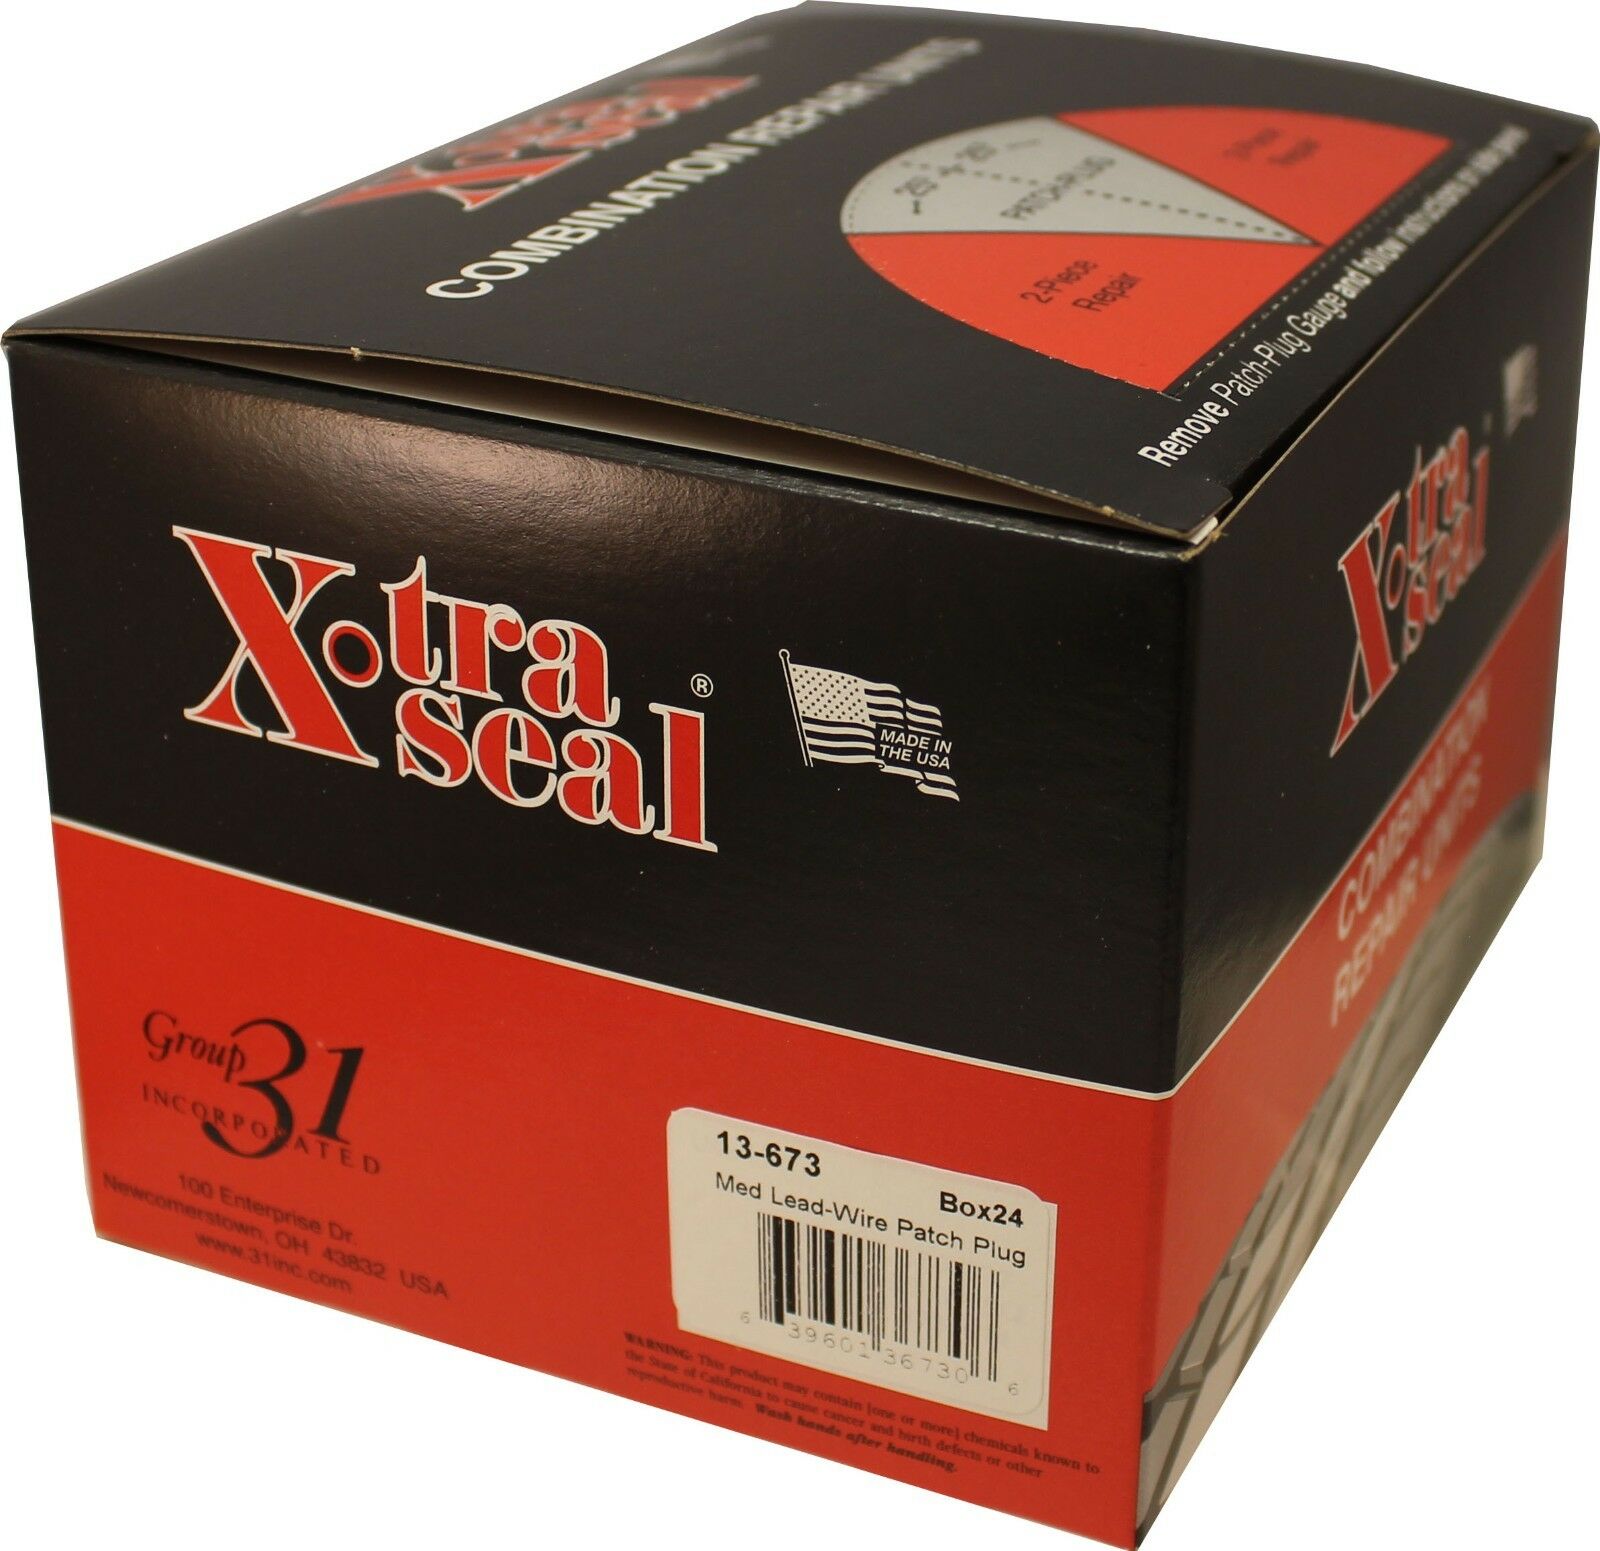 Xtra Seal 13-673 Combination Dipped 2-1/8" x 1/4" Repair Patch Plug Box of 24